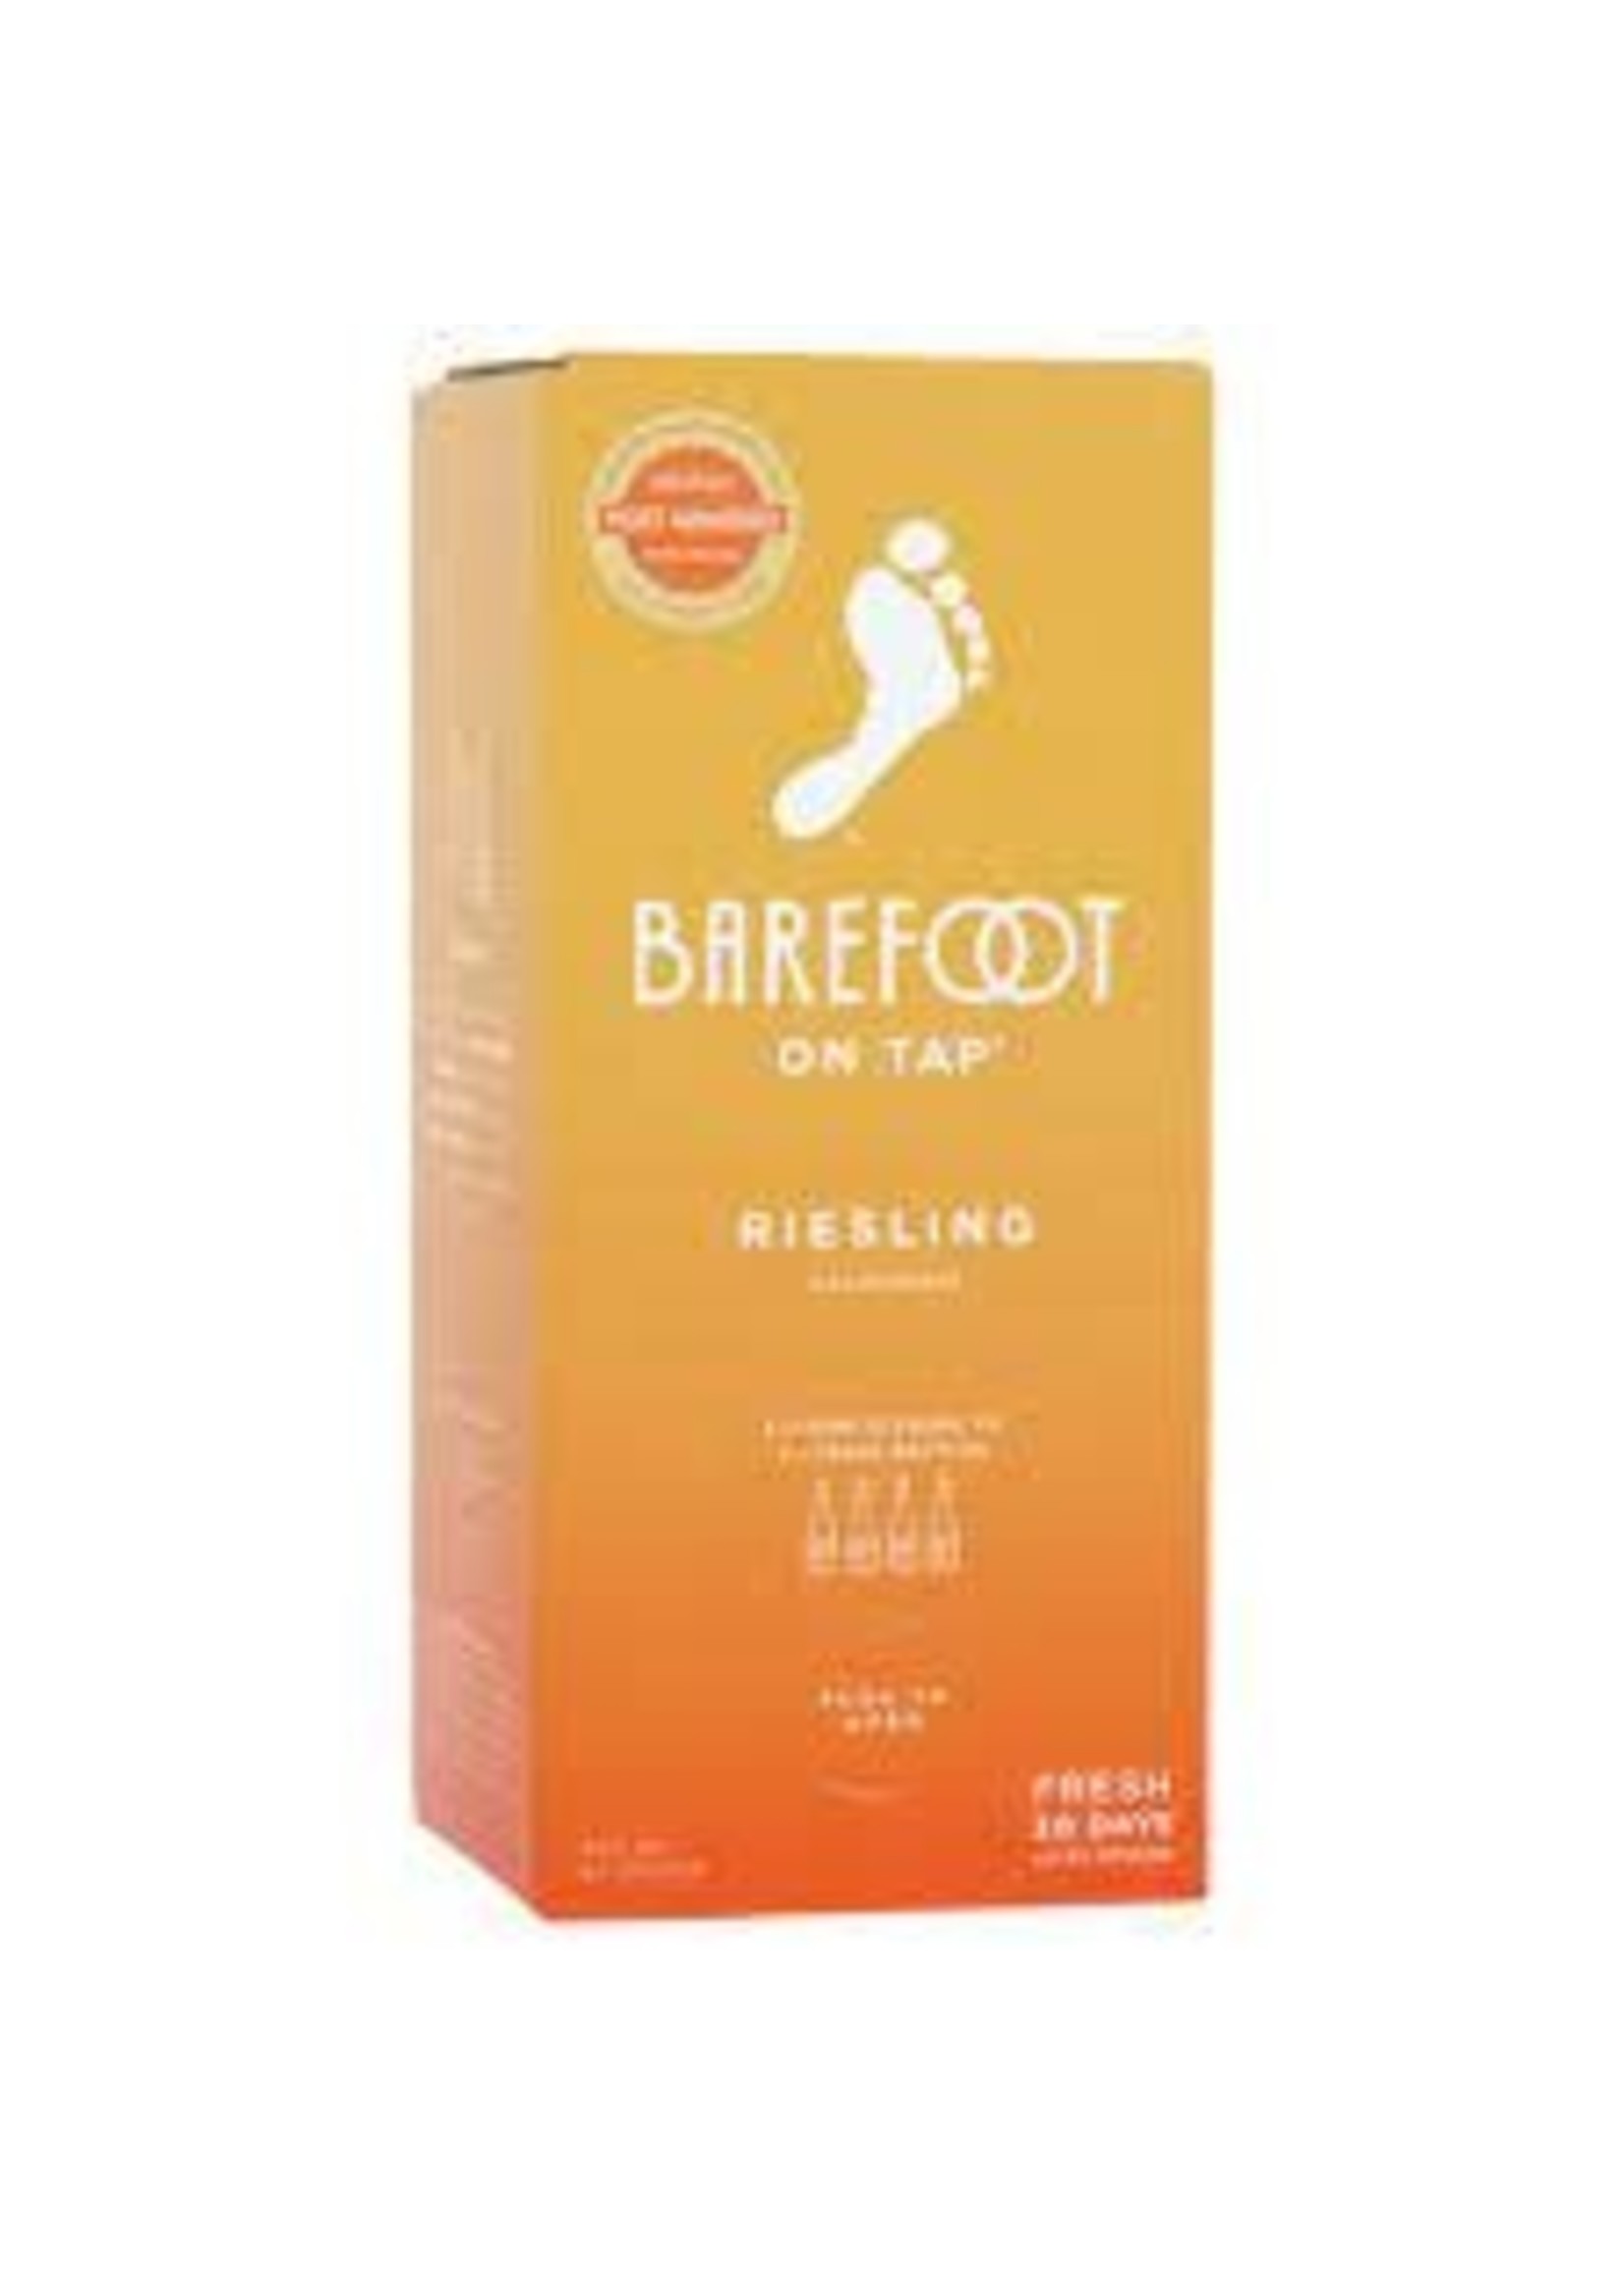 BAREFOOT RIESLING 3L